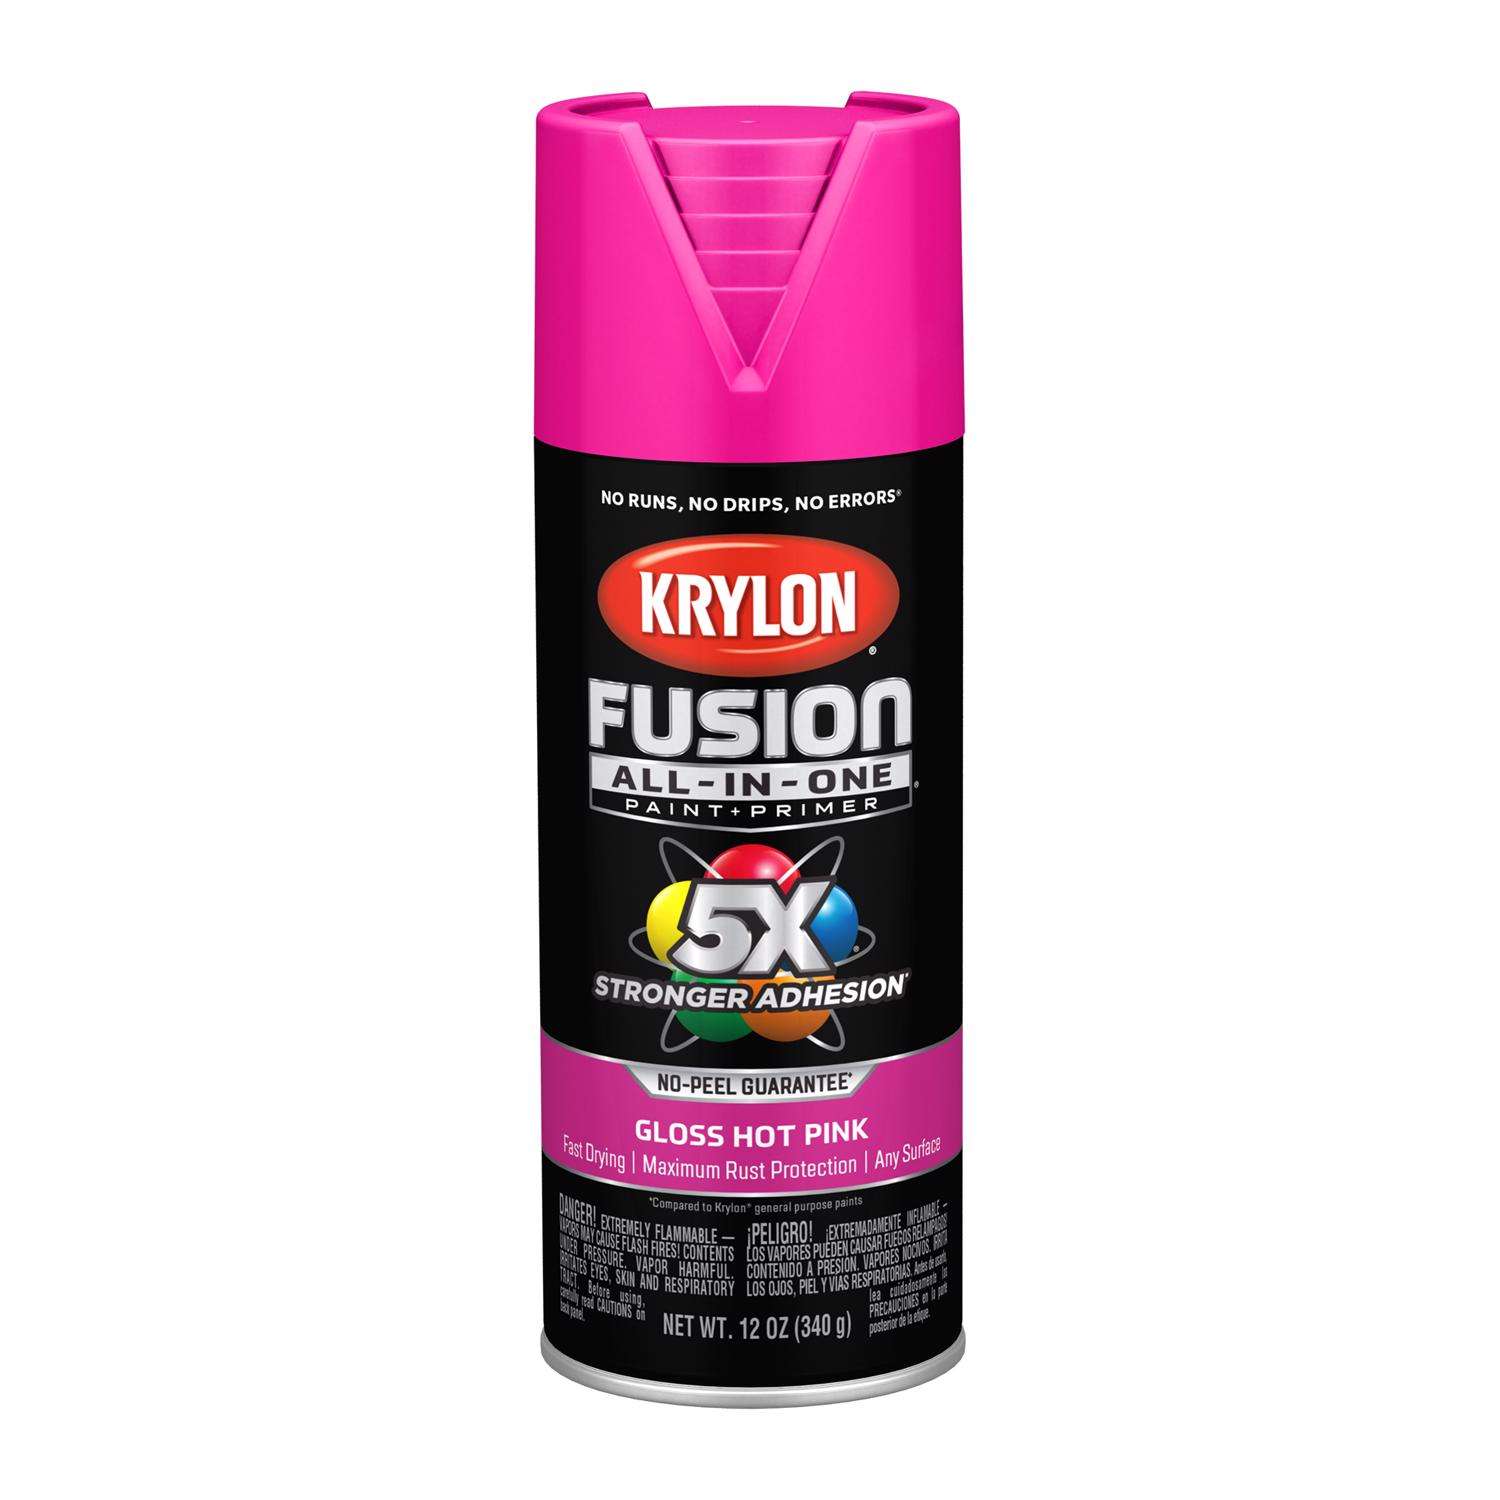 Krylon Fusion All-In-One Gloss Hot Pink Paint+Primer Spray Paint 12 oz -  Ace Hardware